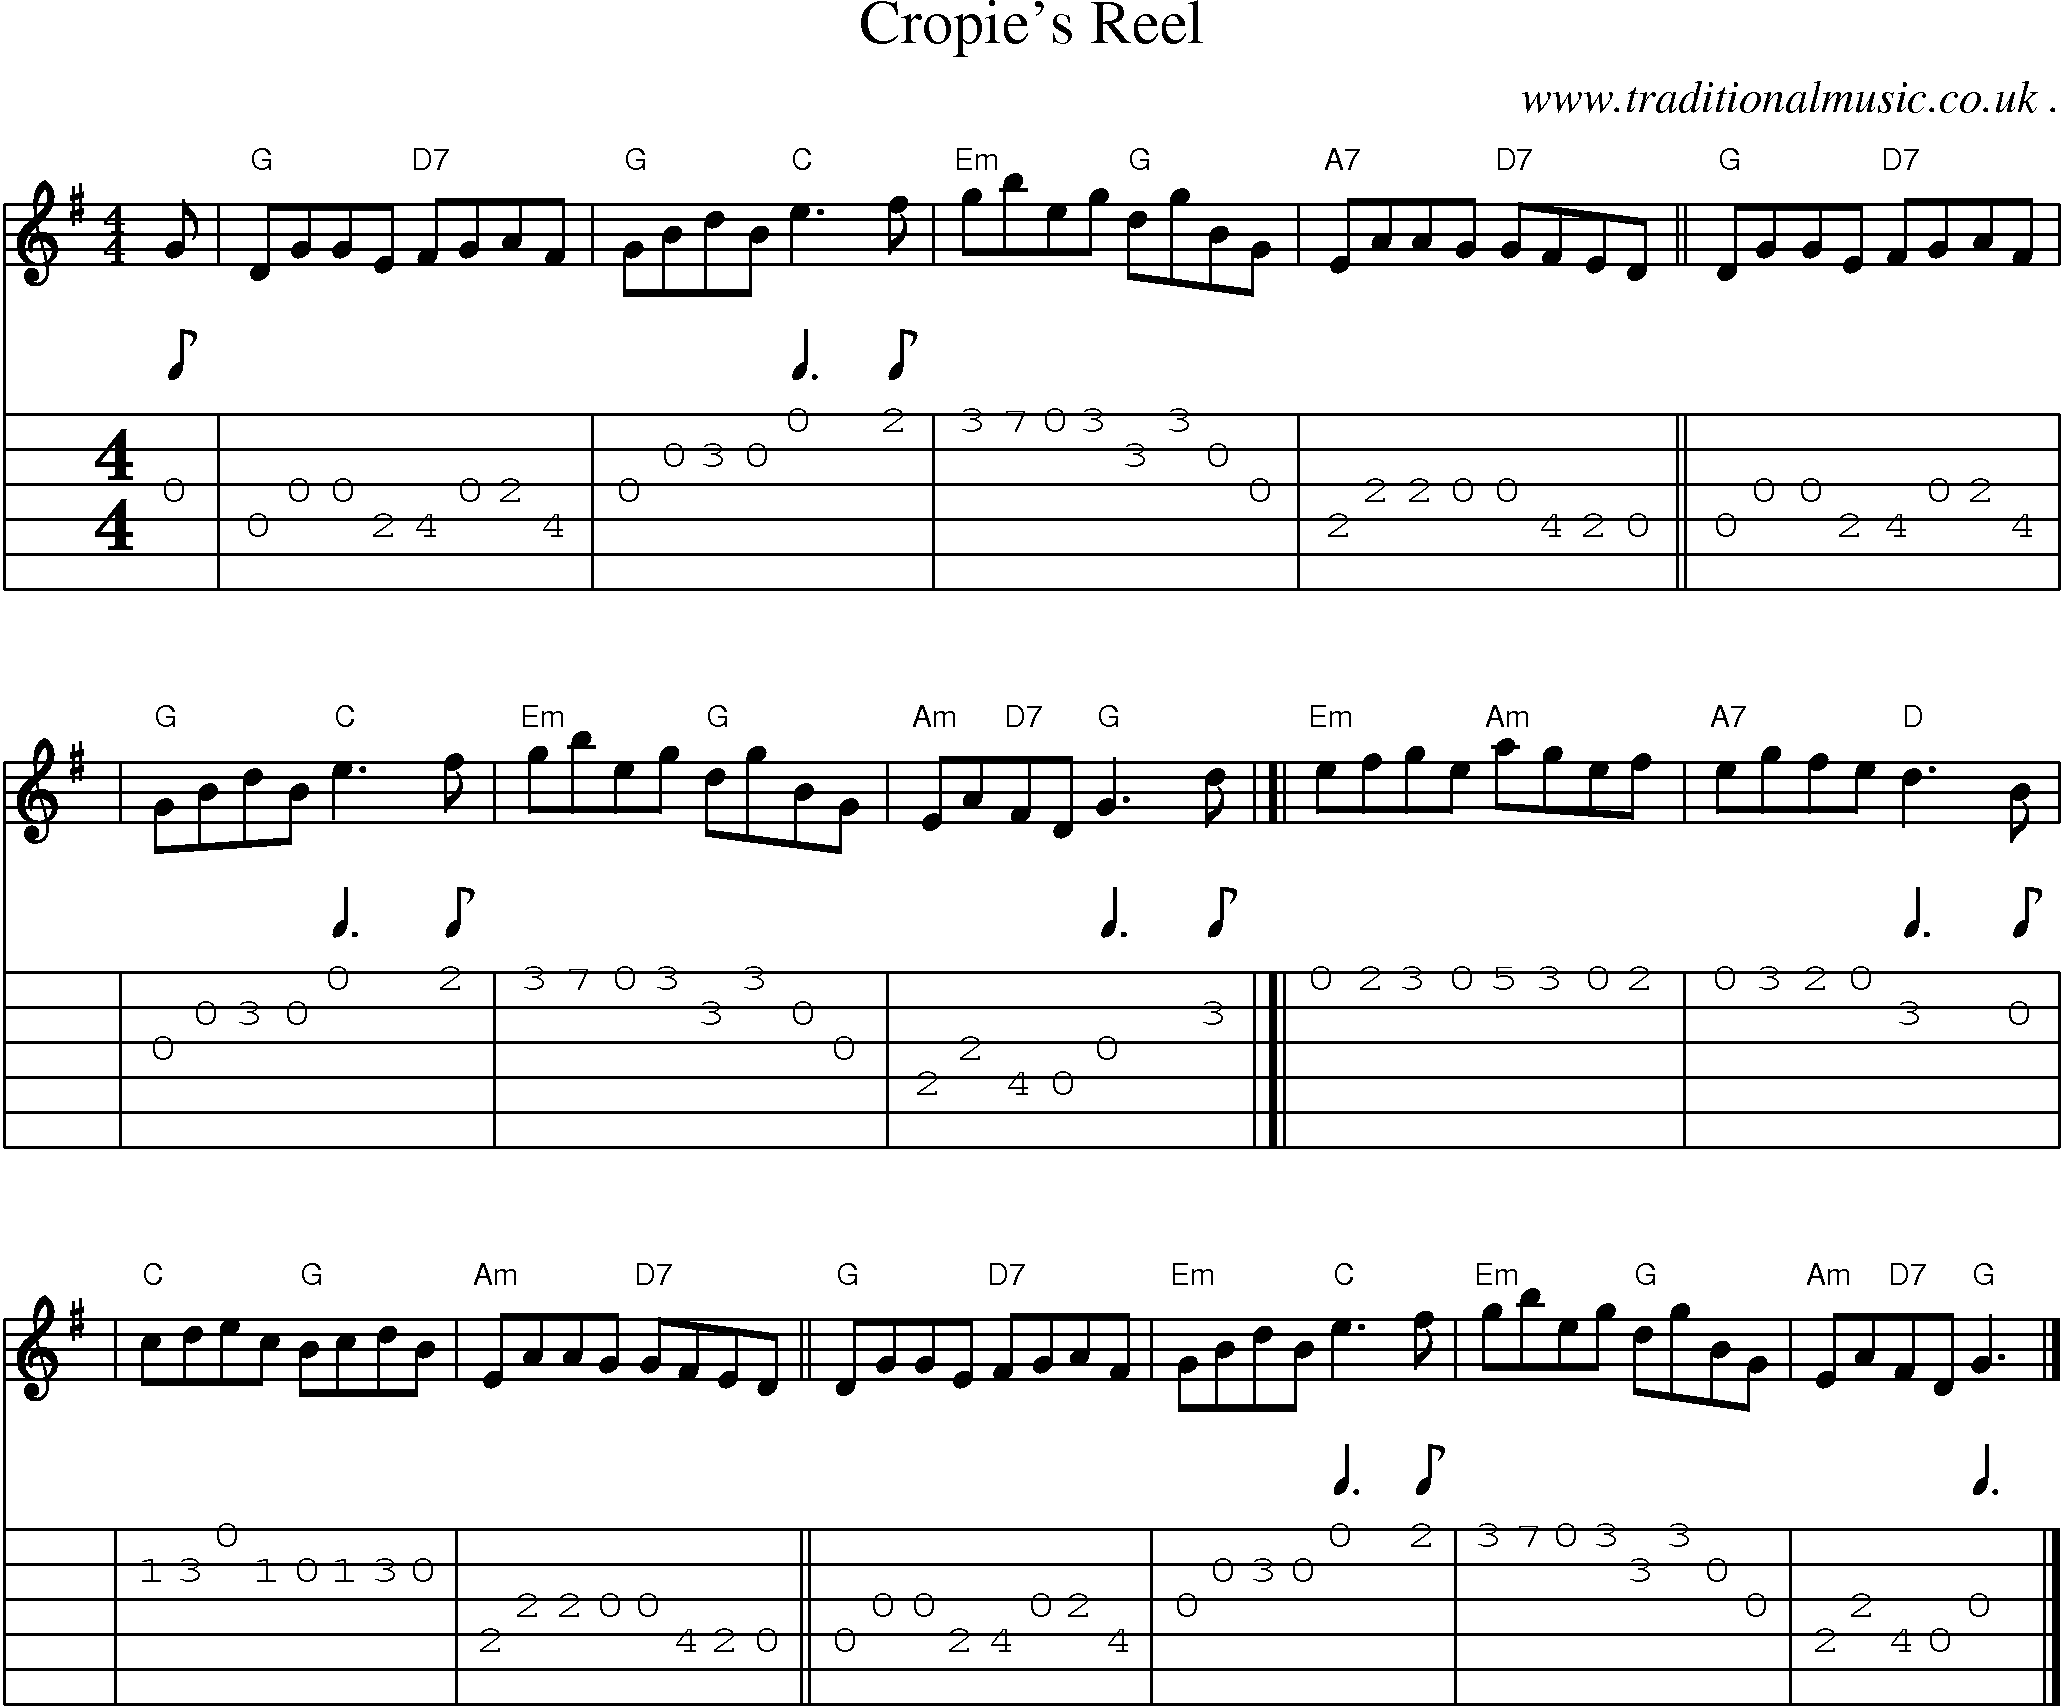 Sheet-music  score, Chords and Guitar Tabs for Cropies Reel